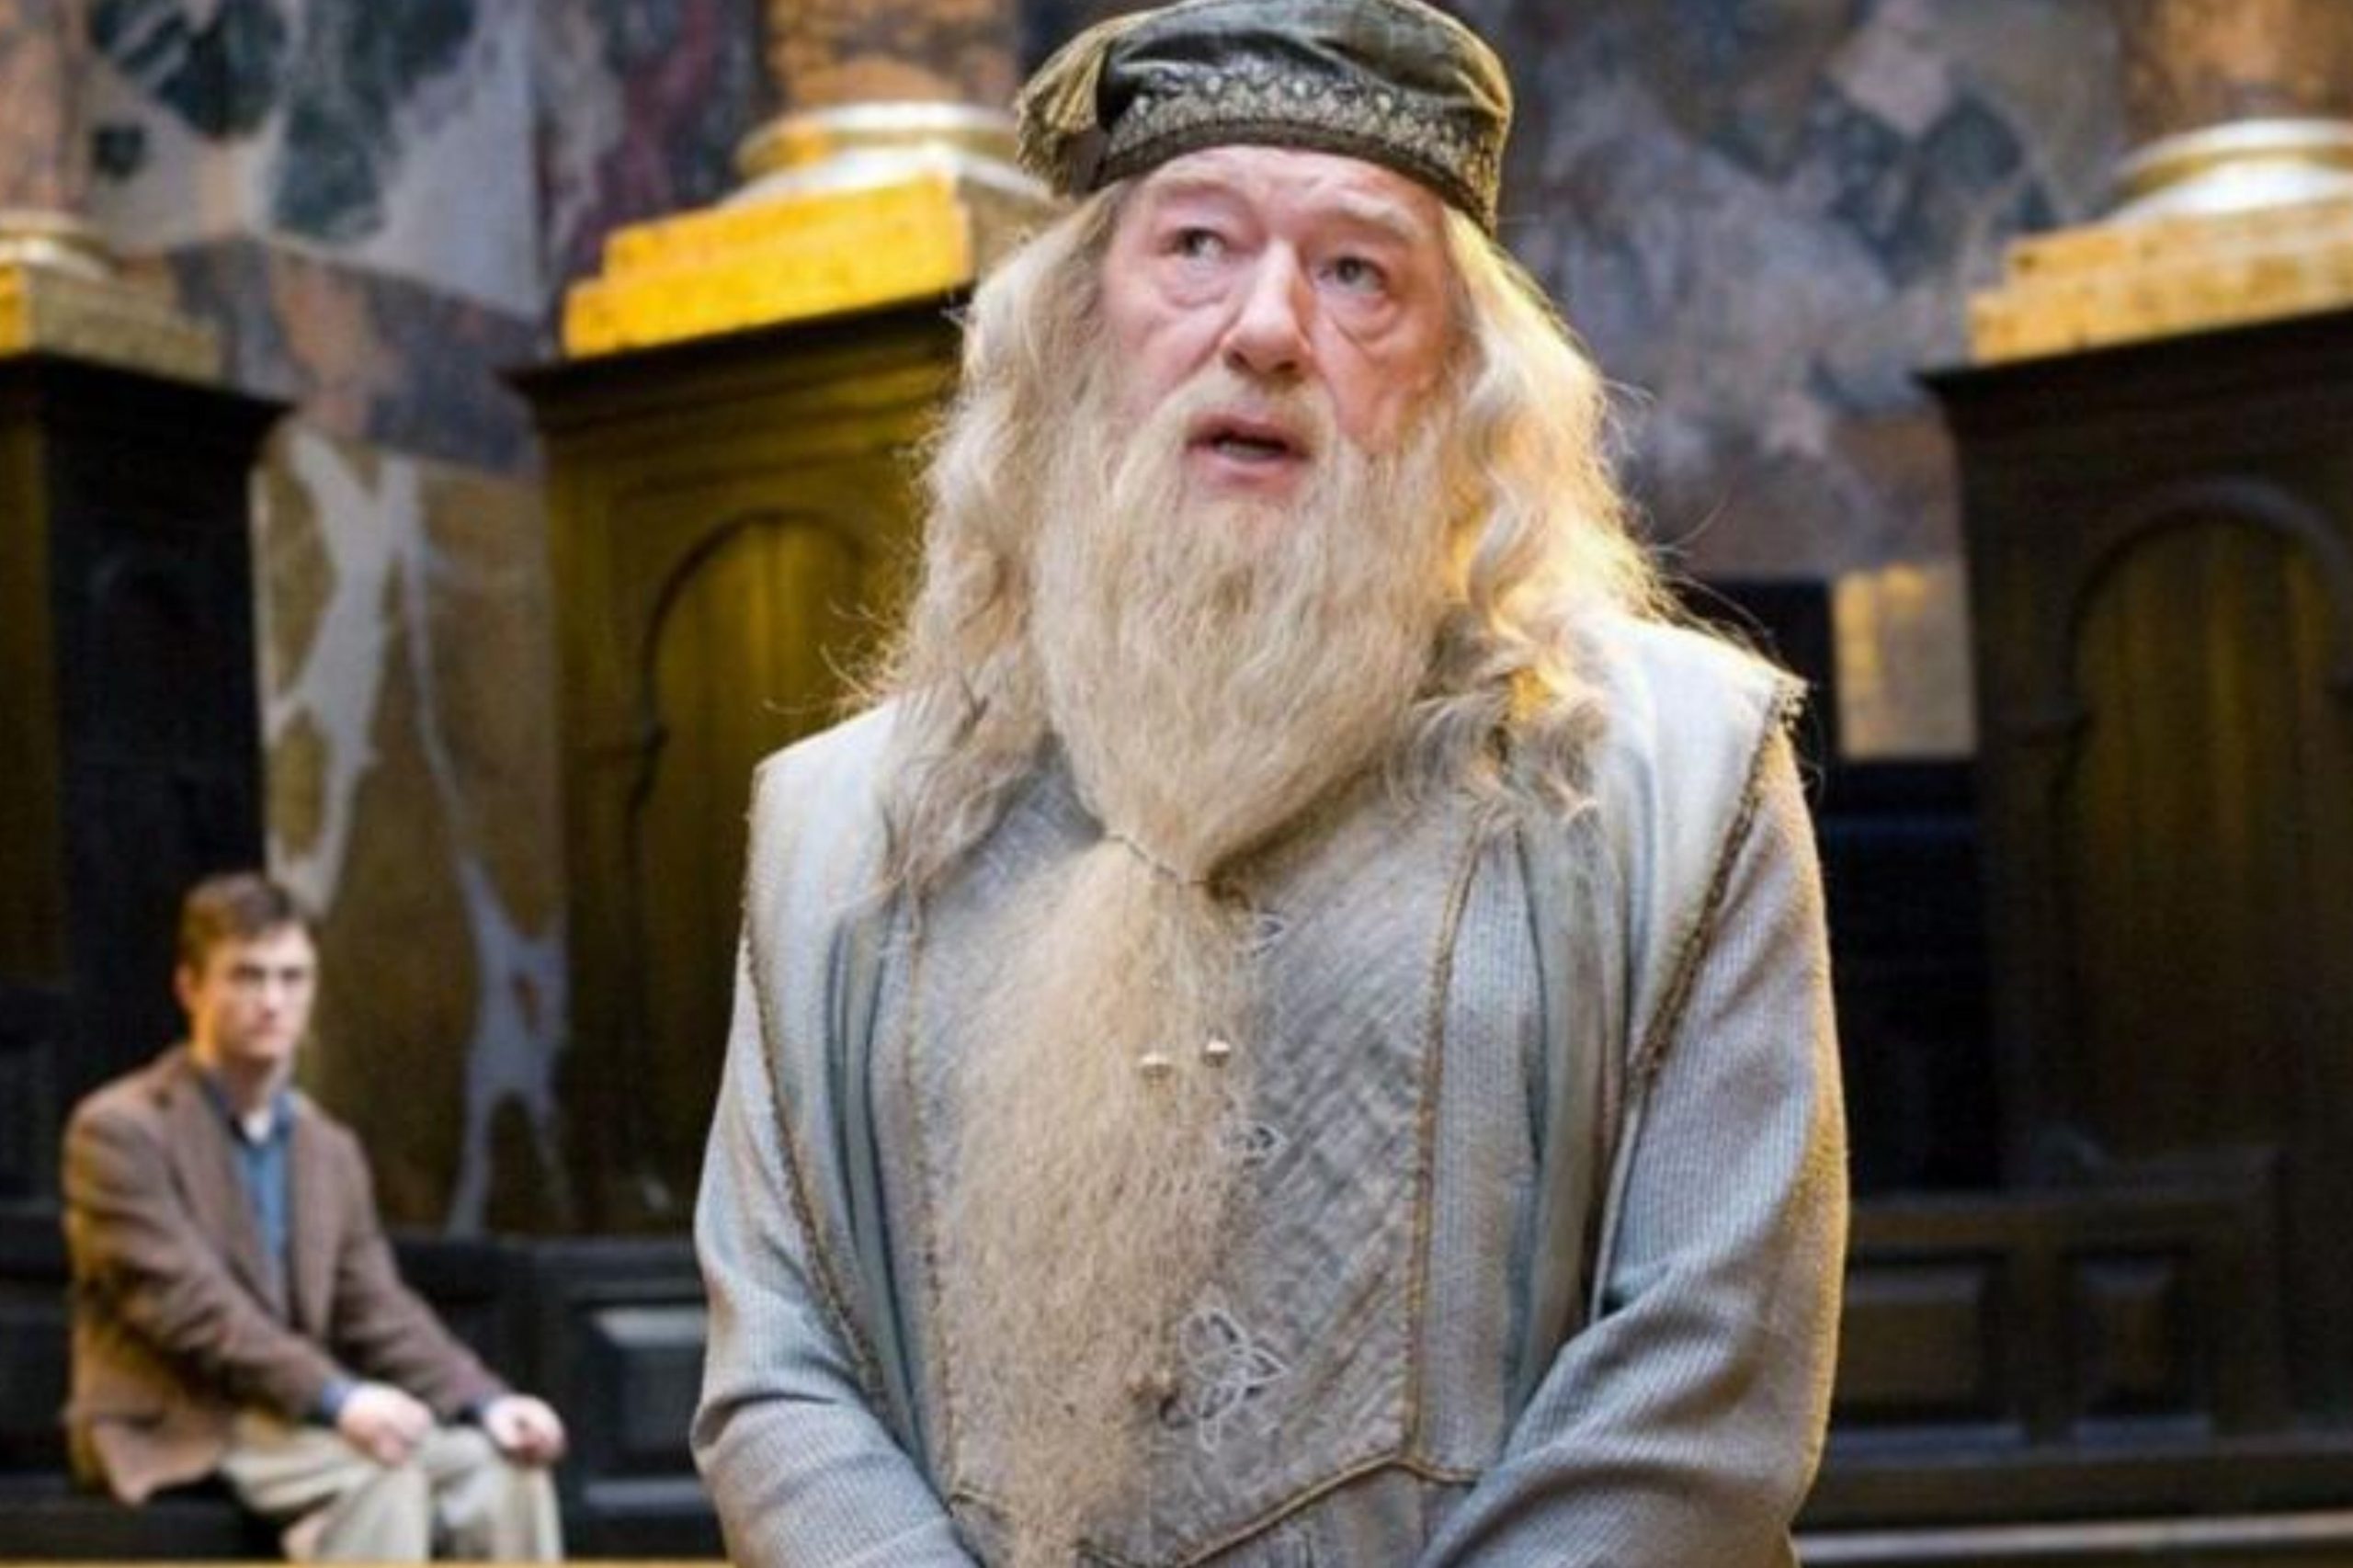 The Harry Potter world mourns the death of actor Michael Gambon (Dumbledore), Magnate Daily